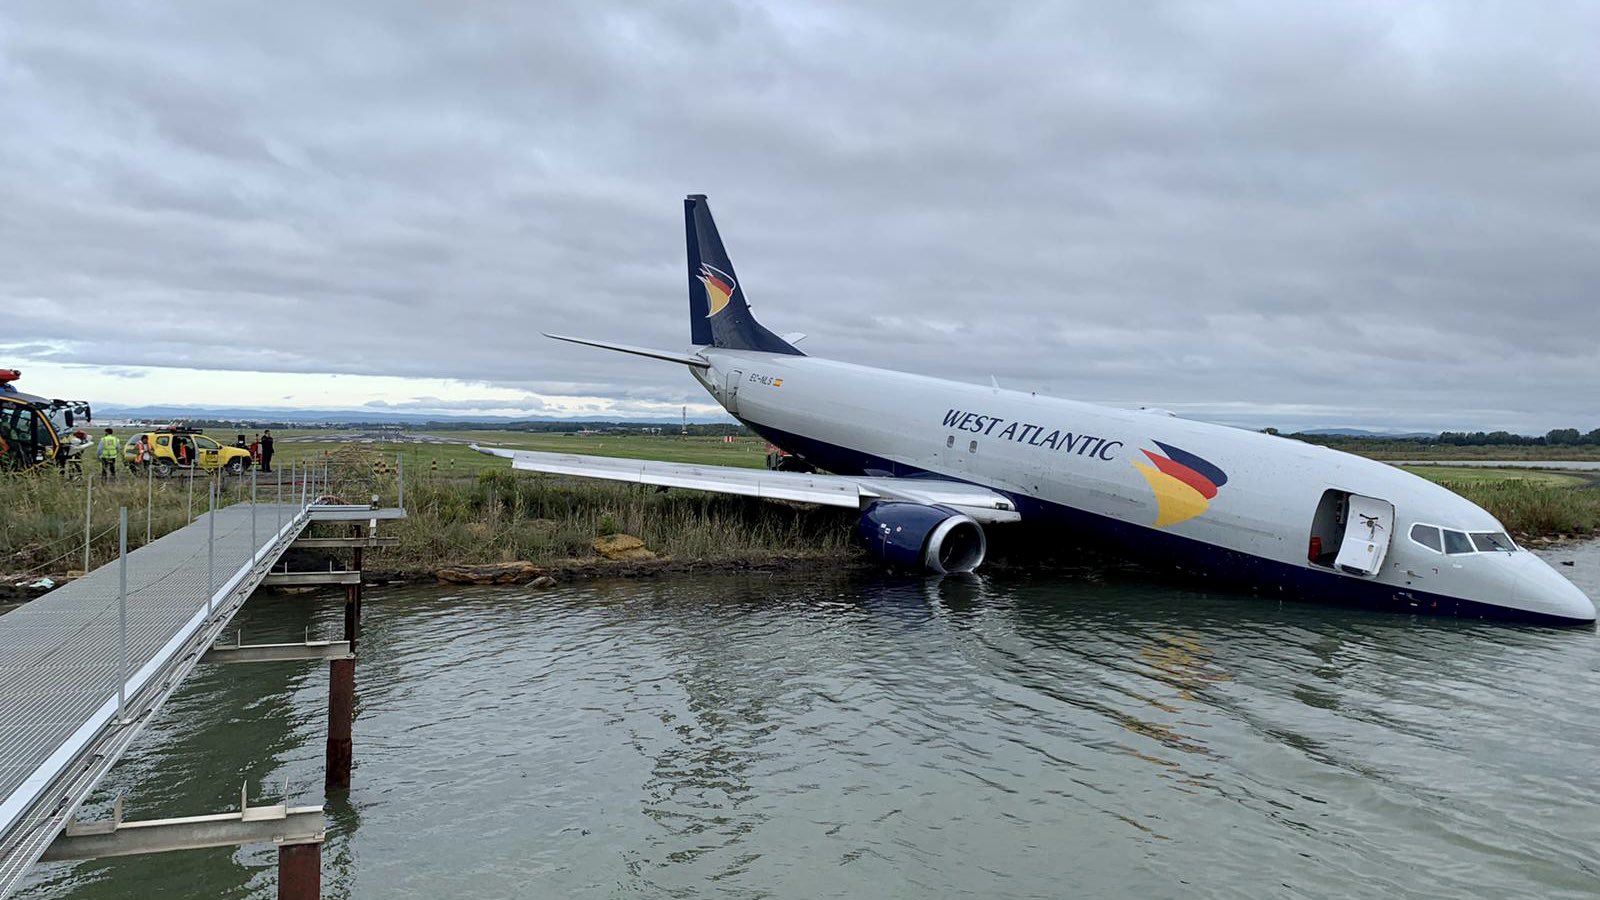 A West Atlantice B737 lies with its nose submerged in a lake after a landing incident at Montpellier Airport in France.